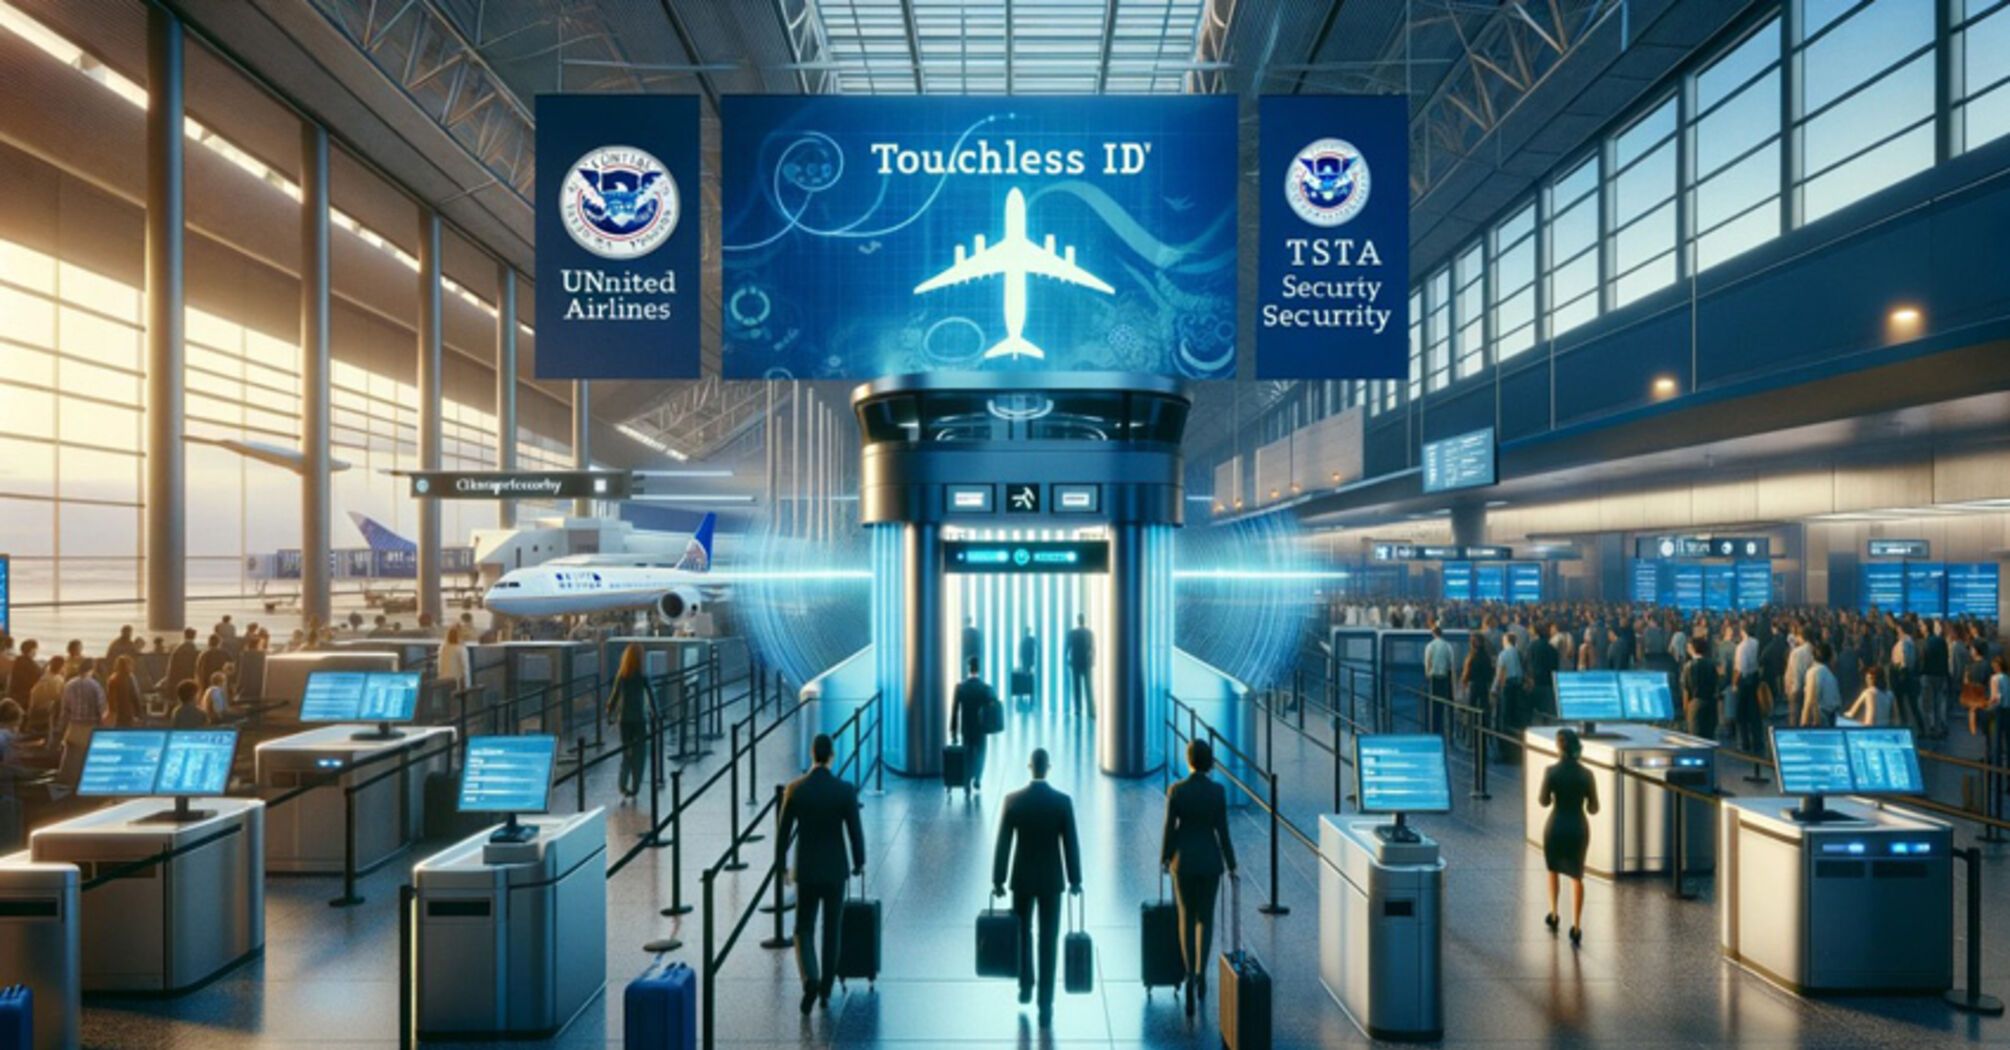 Touchless ID: how the new identification system helps tourists at the airport